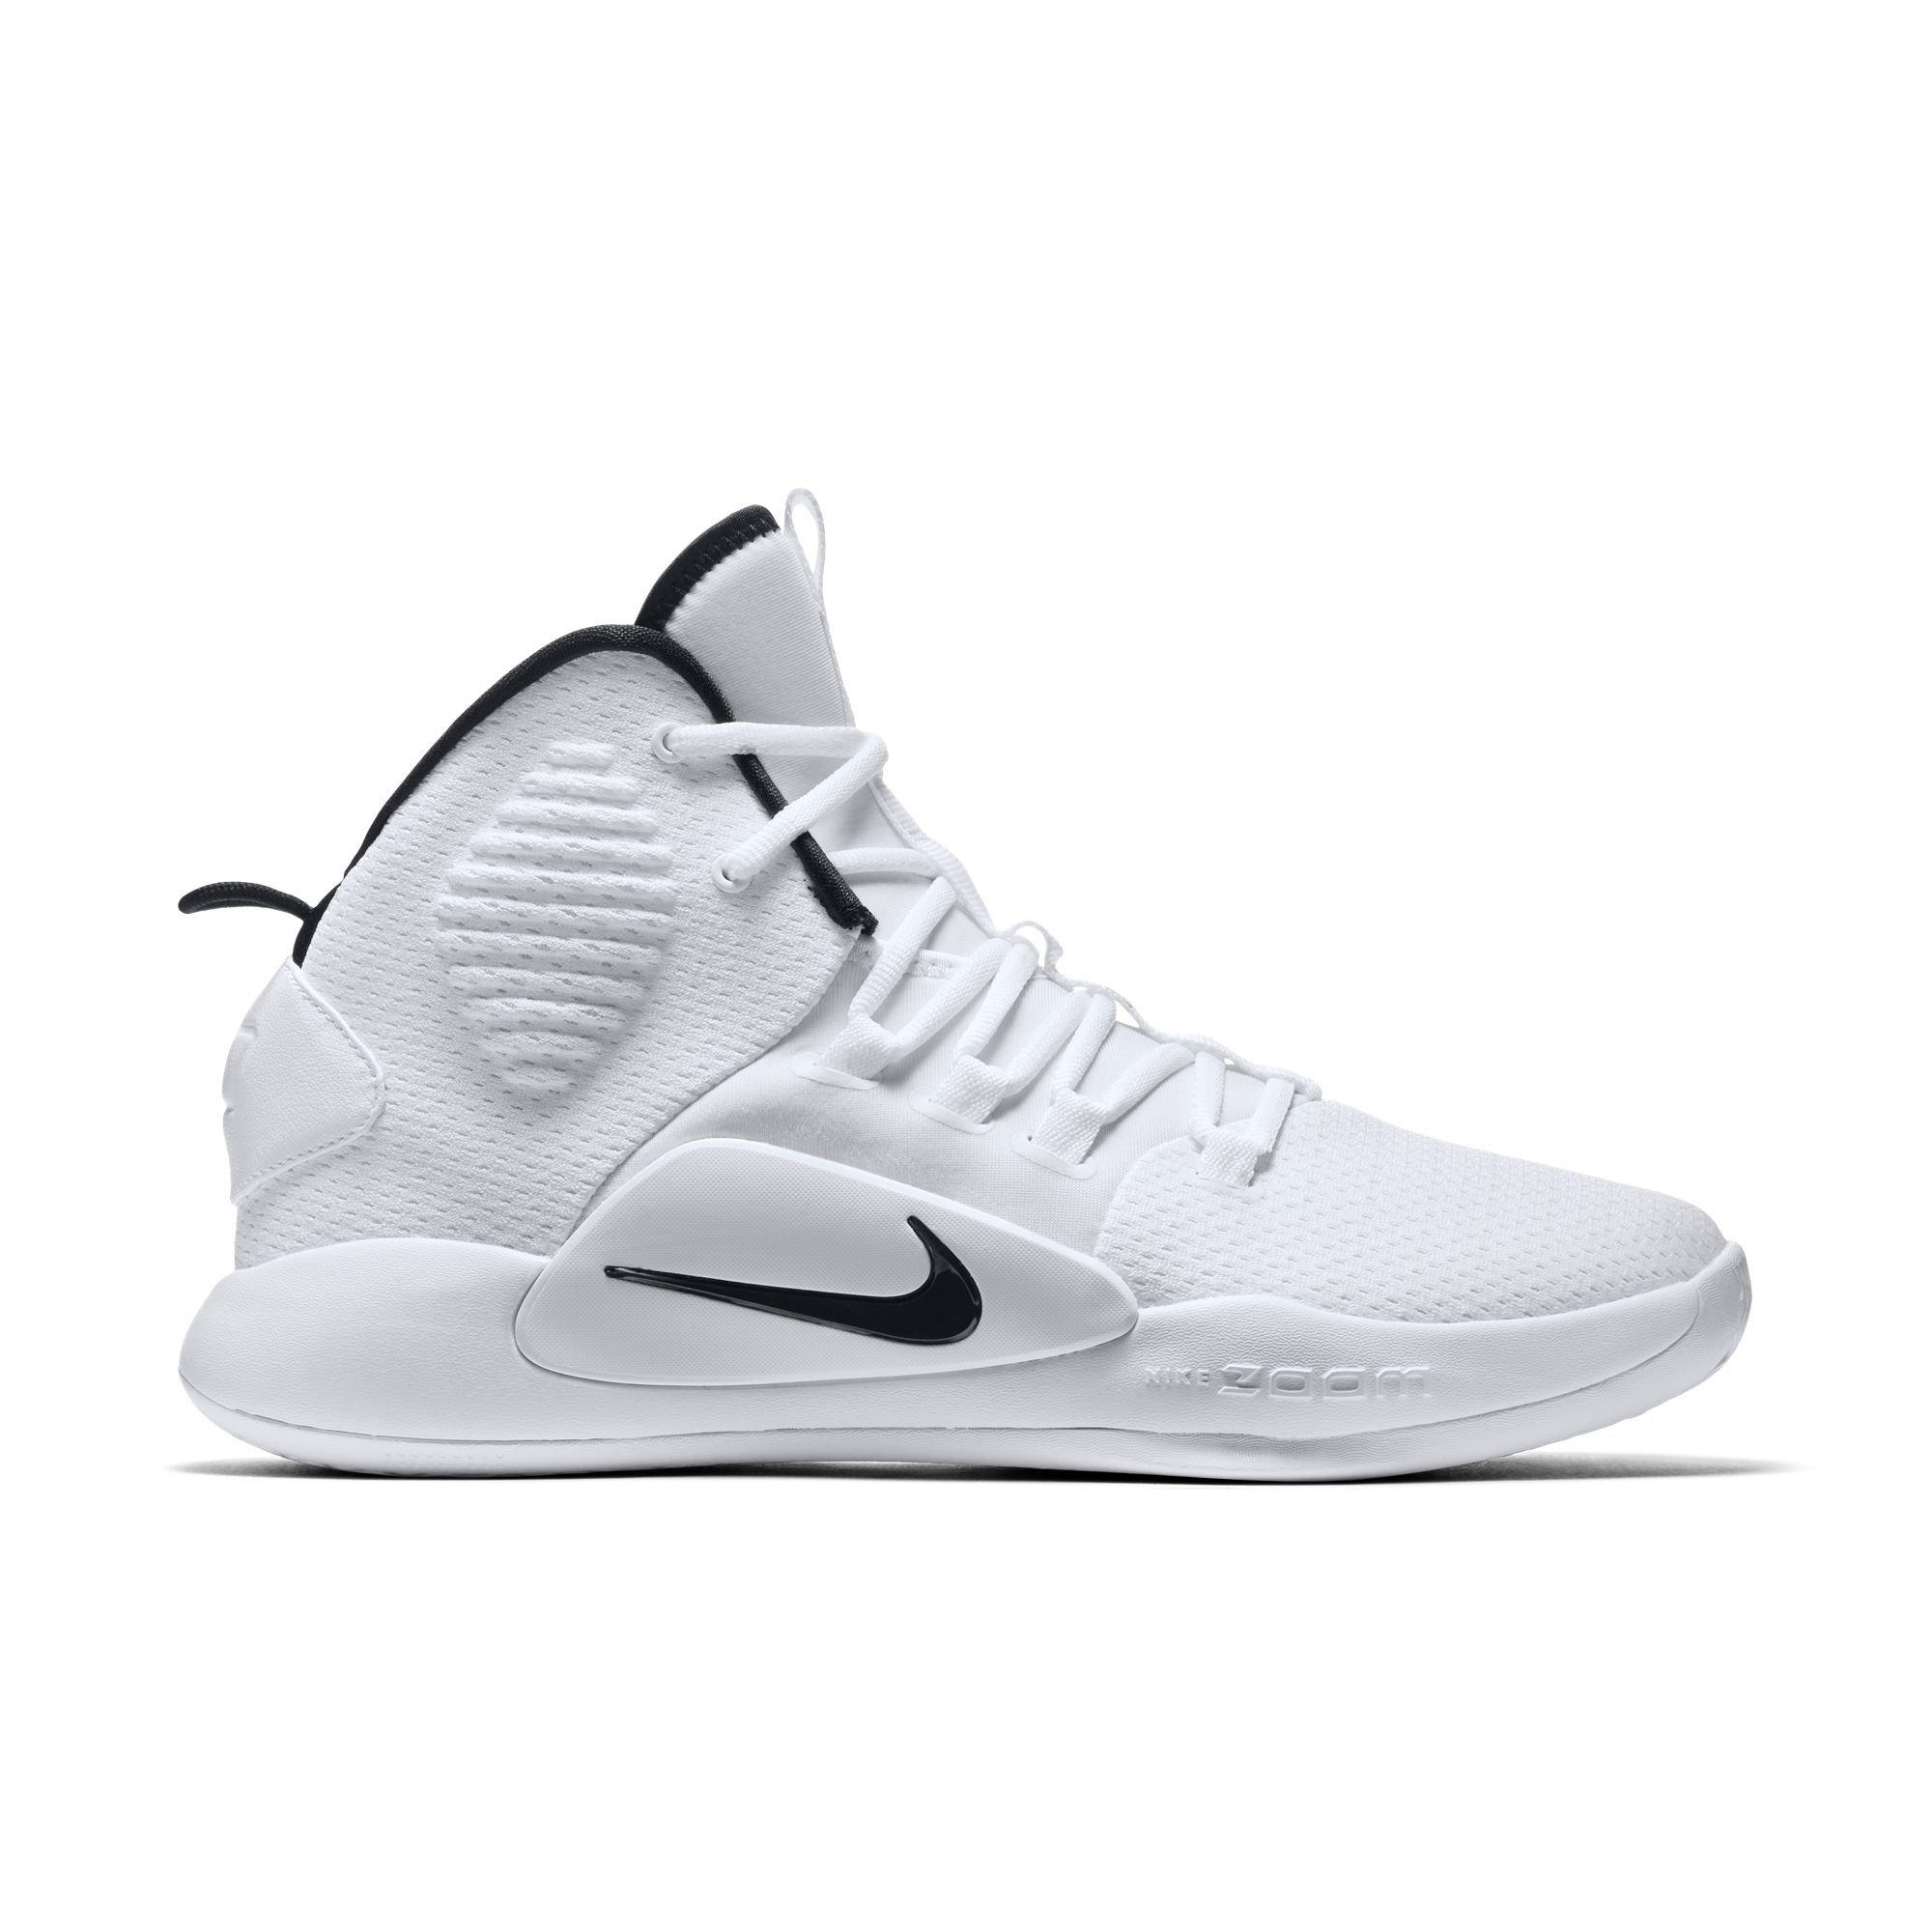 basketball shoes under 75 dollars